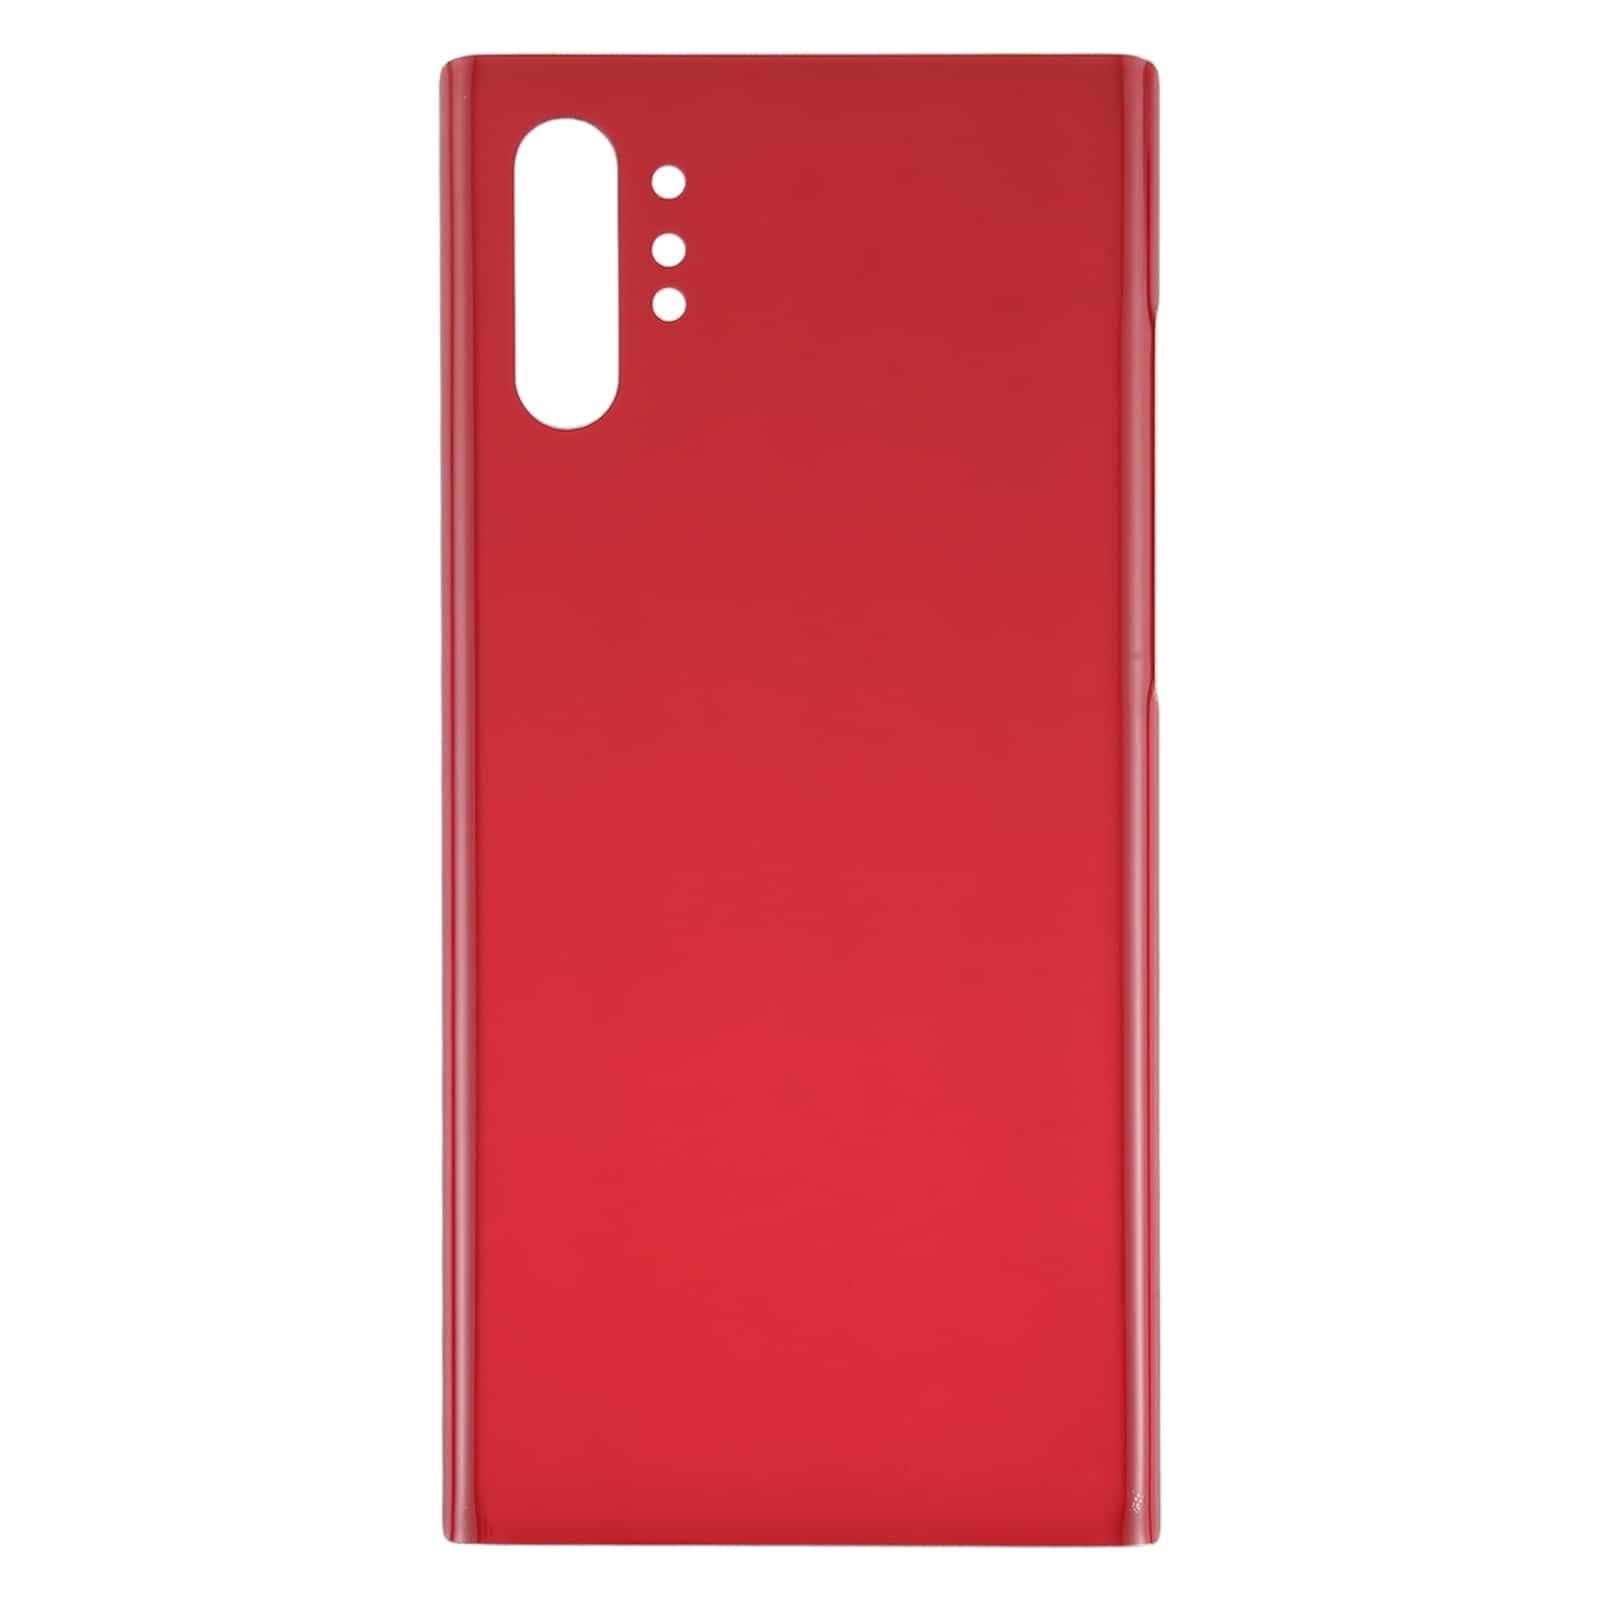 Back Glass Panel for  Samsung Galaxy Note10 Plus Red